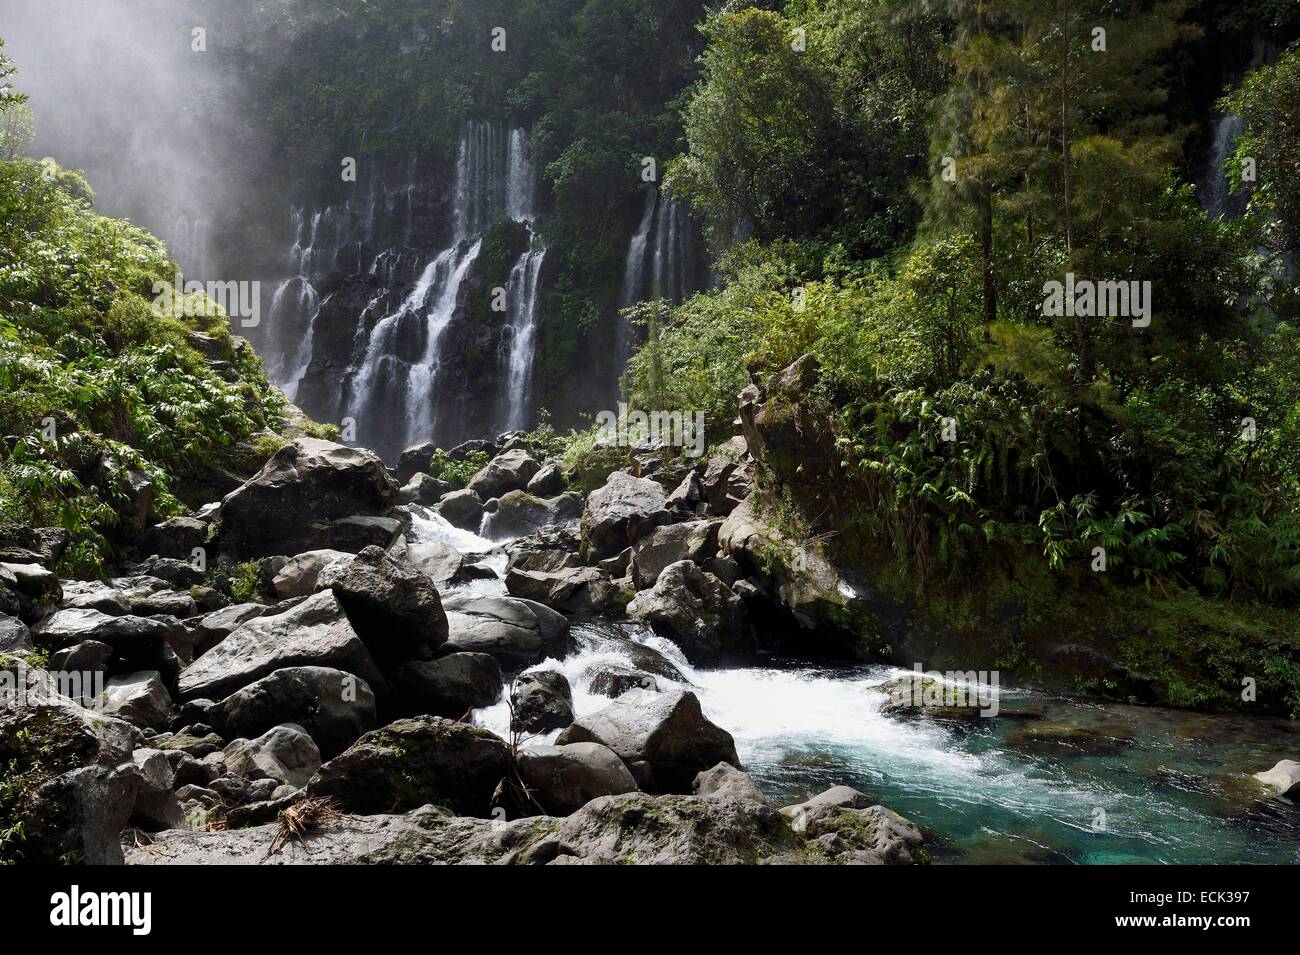 France, Reunion Island (French overseas department), Parc National de la Reunion (Reunion National Park) listed as World Heritage by UNESCO, Saint Joseph, Langevin river on the flanks of the volcano Piton de la Fournaise, Grand Galet waterfall or Langevin Stock Photo